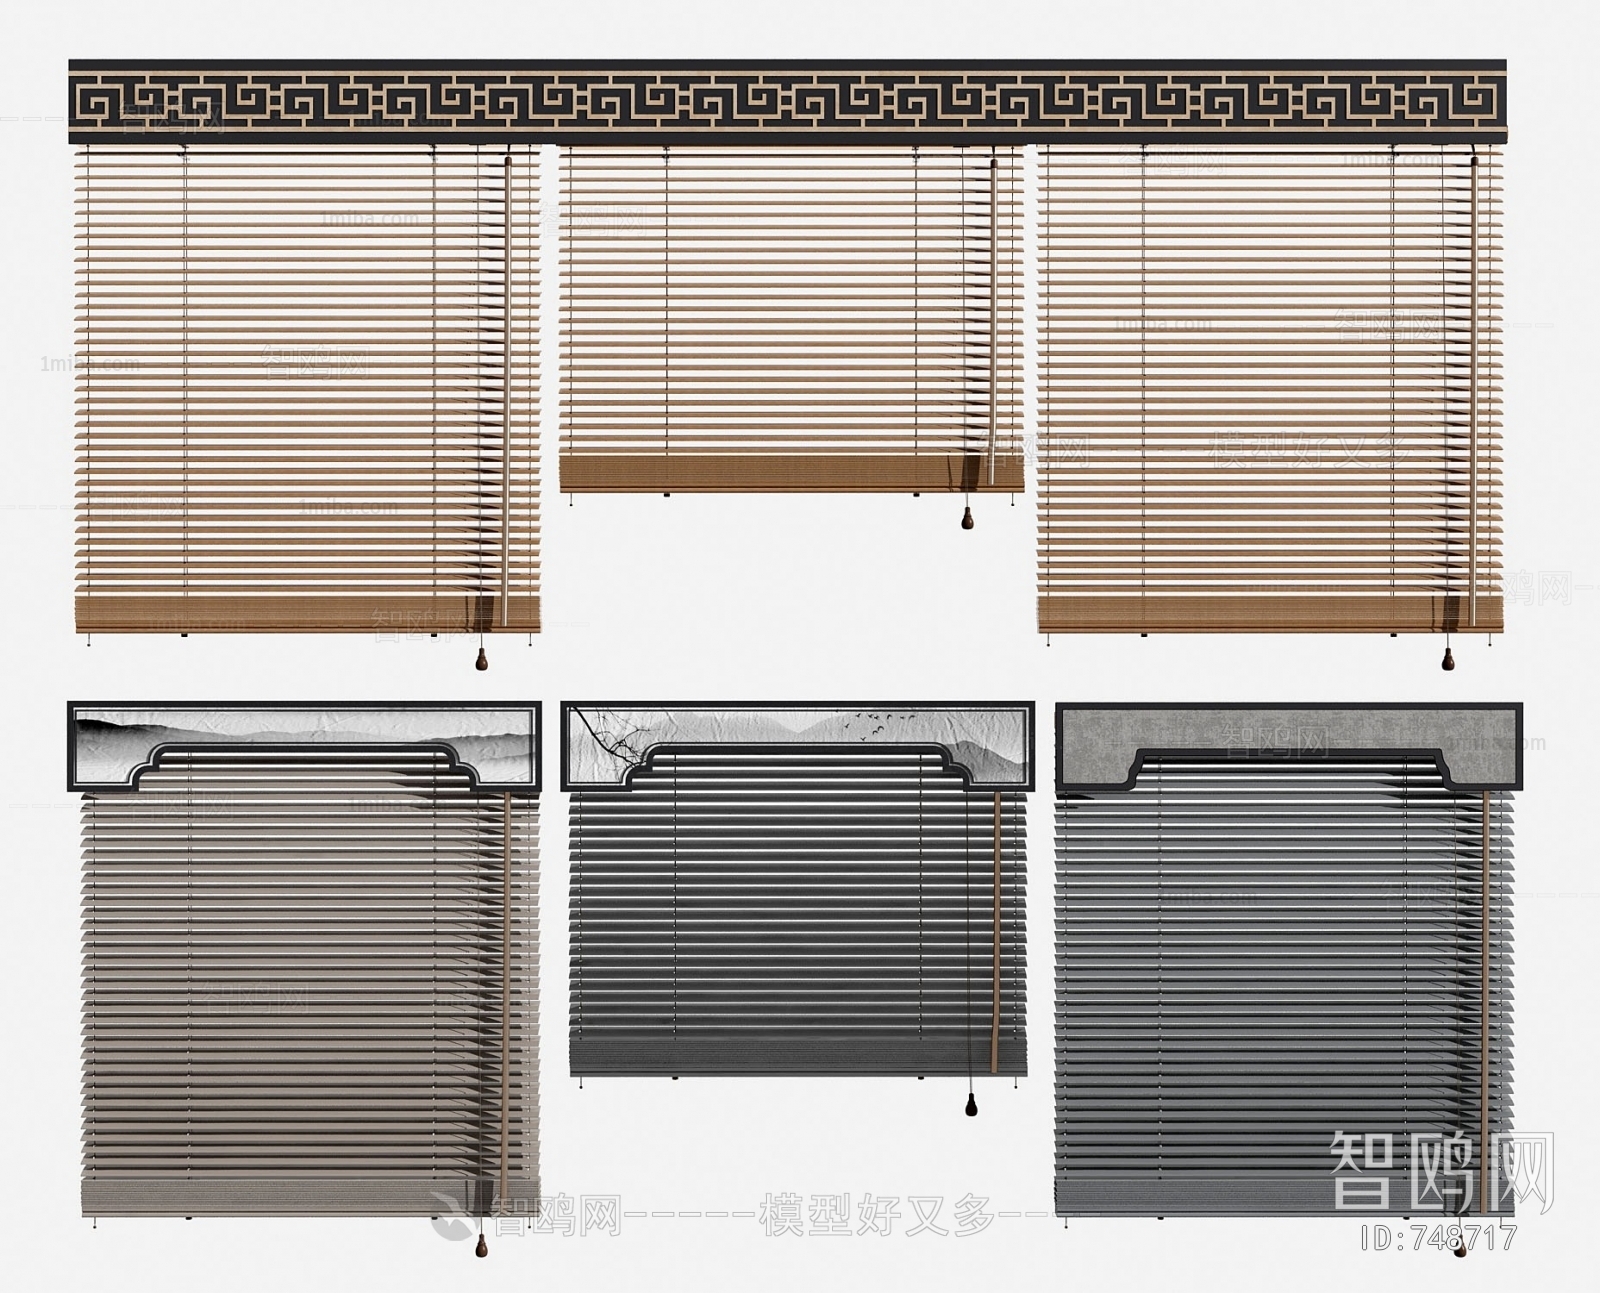 New Chinese Style Venetian Blinds